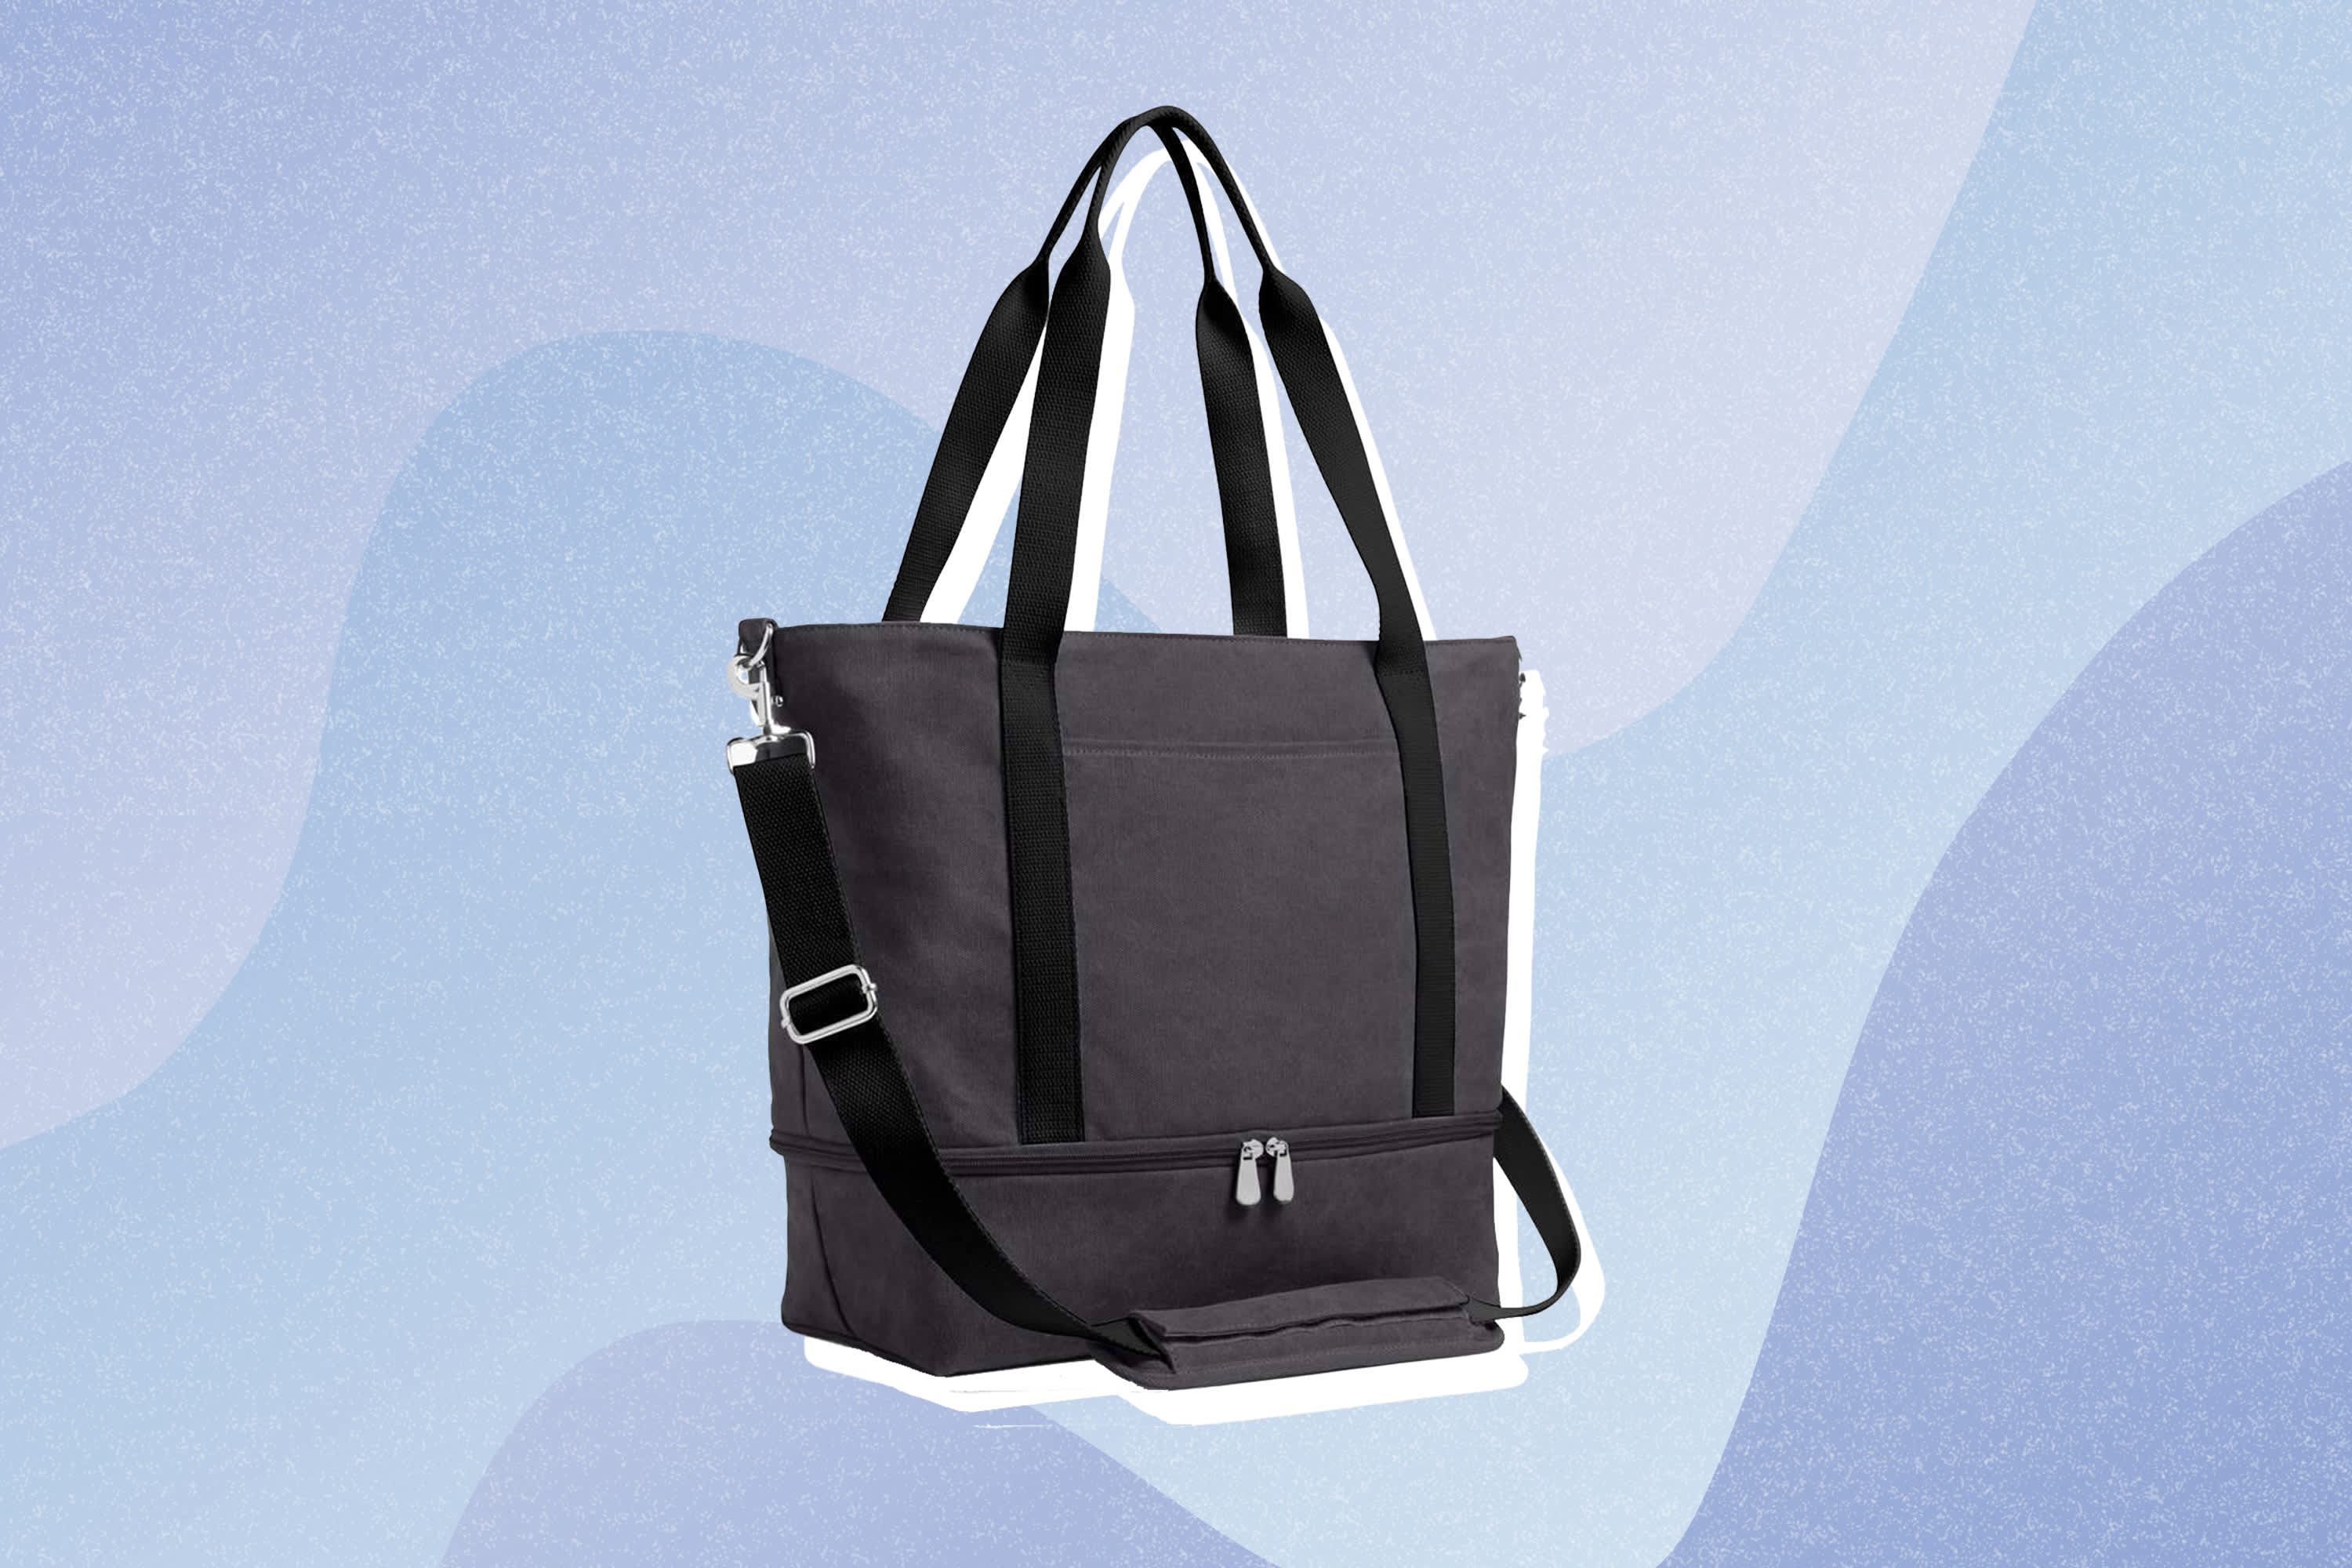 The Waverley is a stylish travel bag you can wear anywhere. Wear